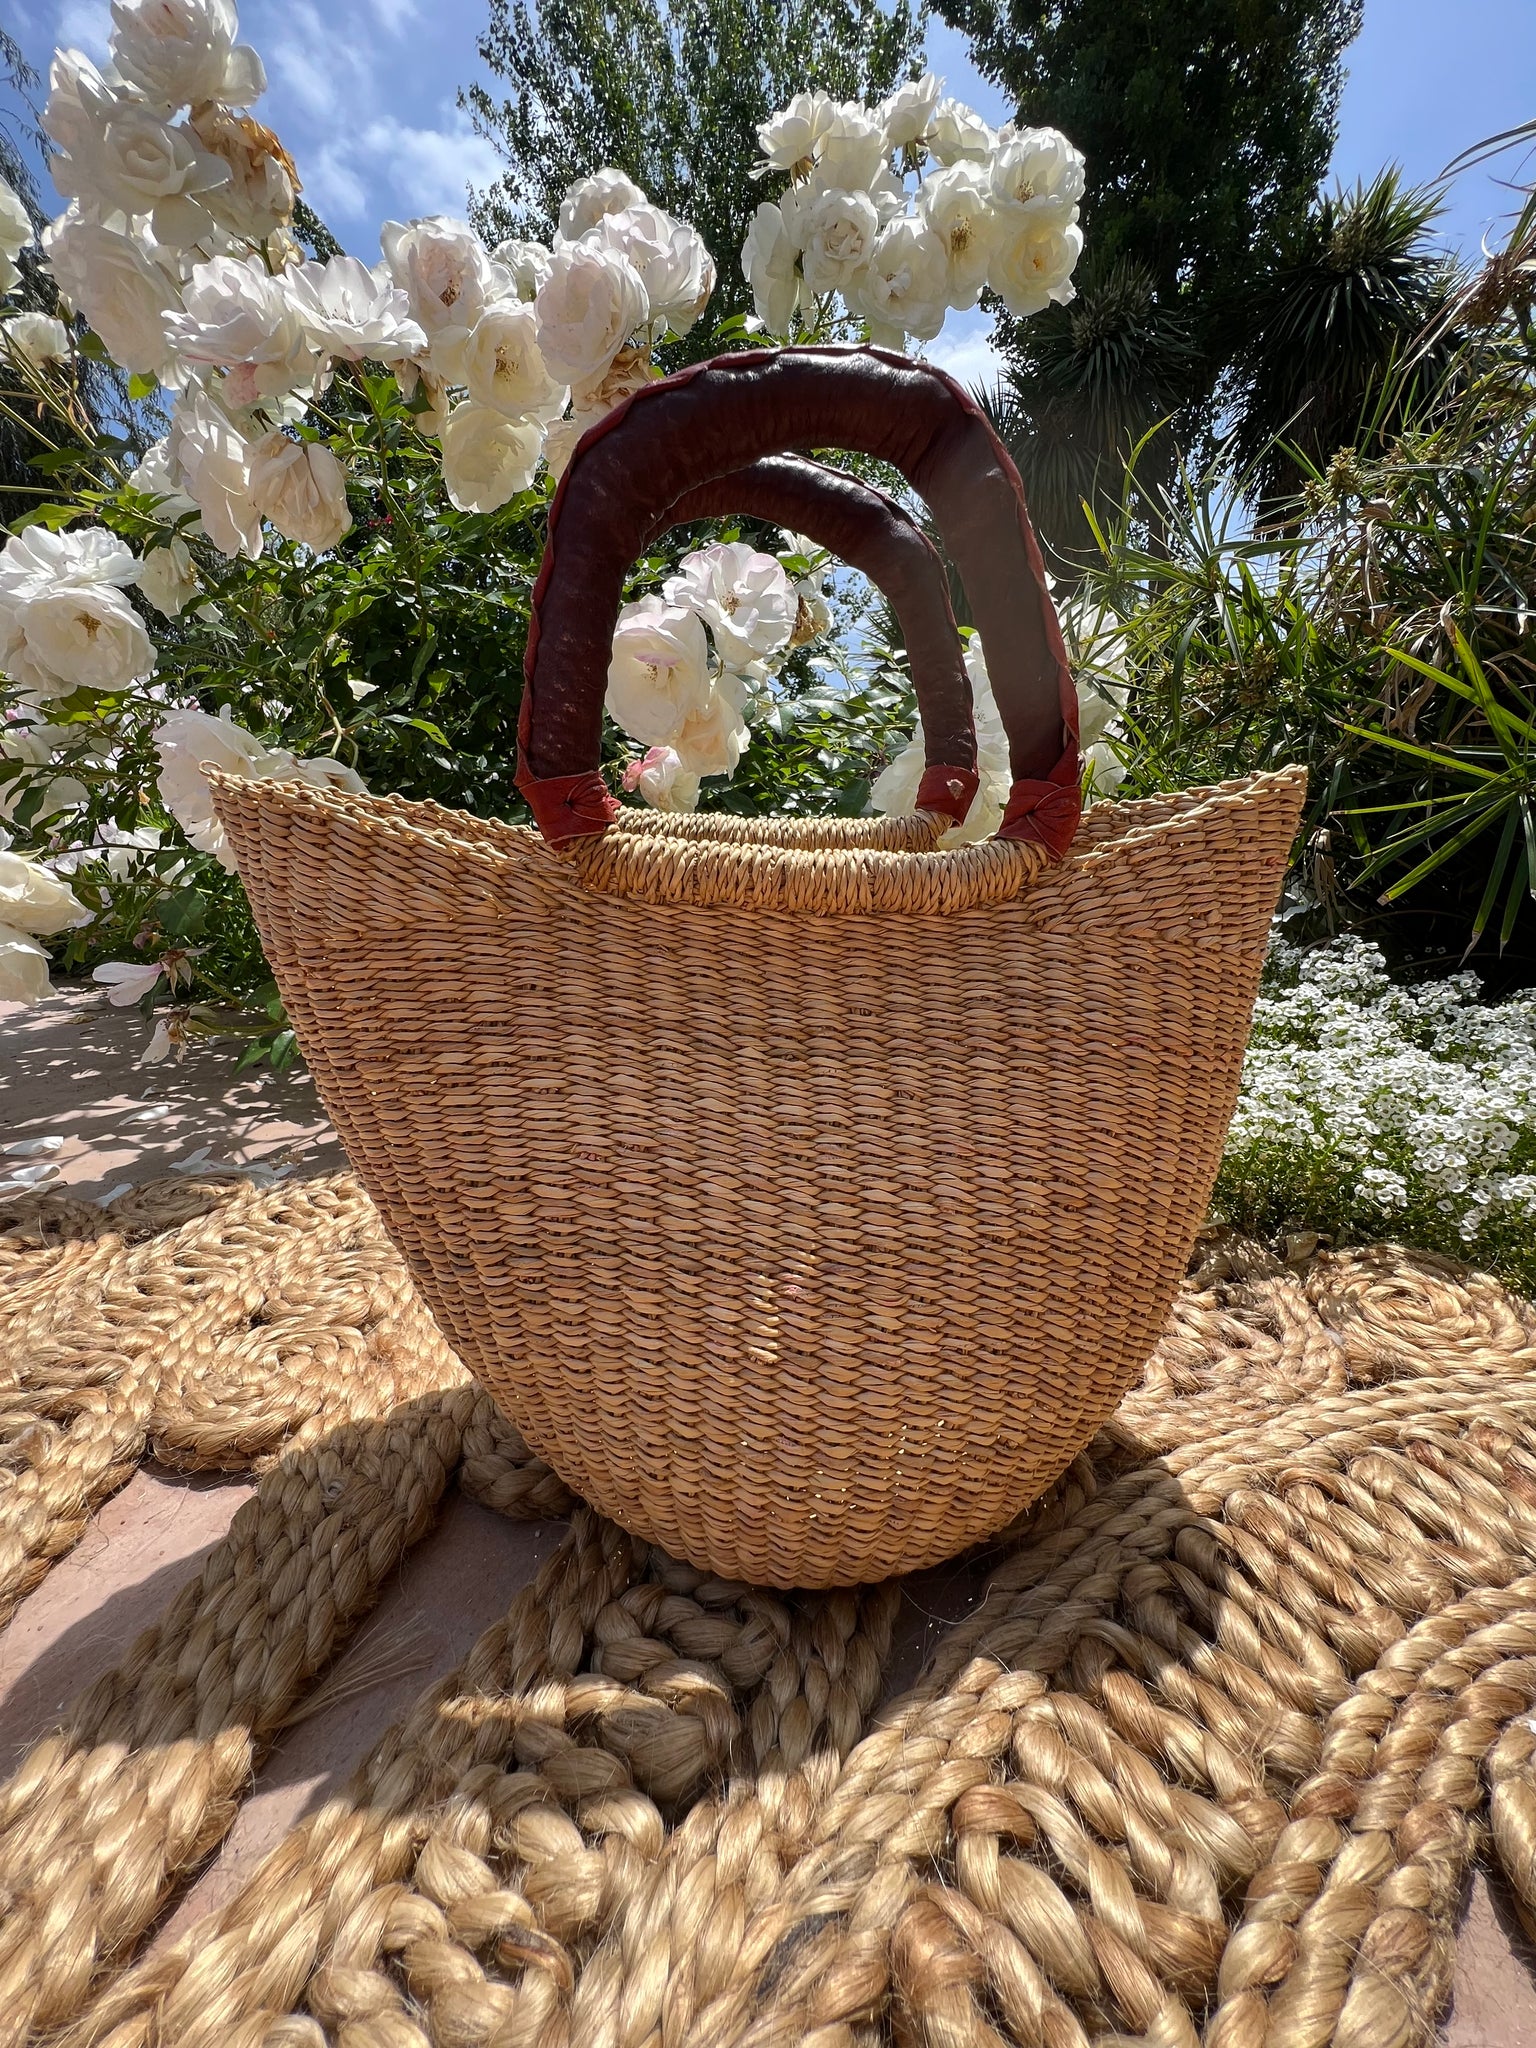 Authentic Market Basket U Shape Leather Handle Straw Small Tote